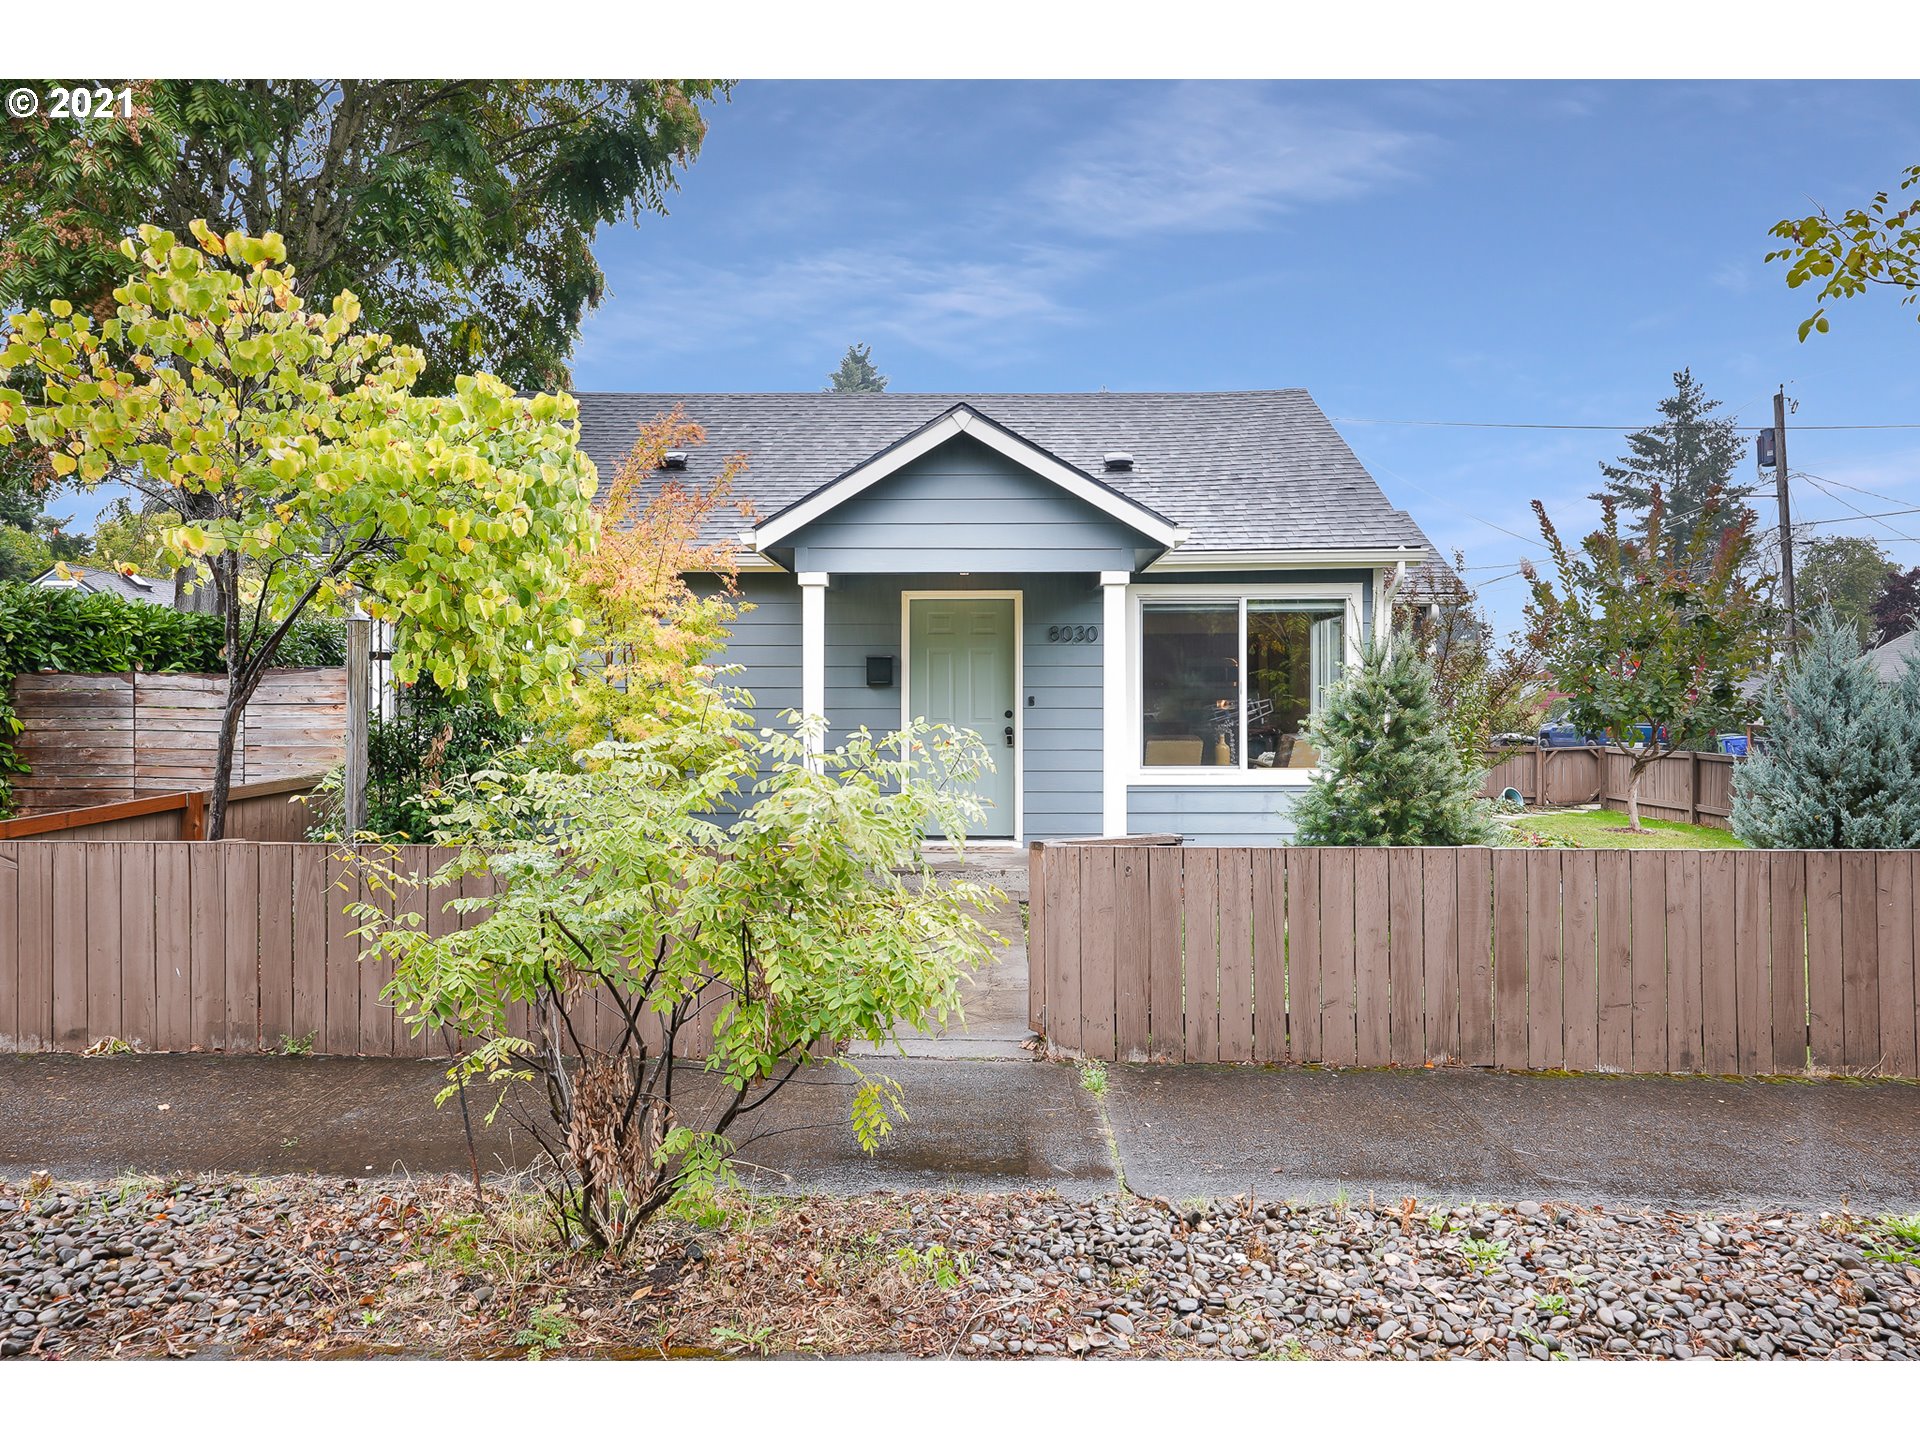 8030 SE 68TH AVE (1 of 23)